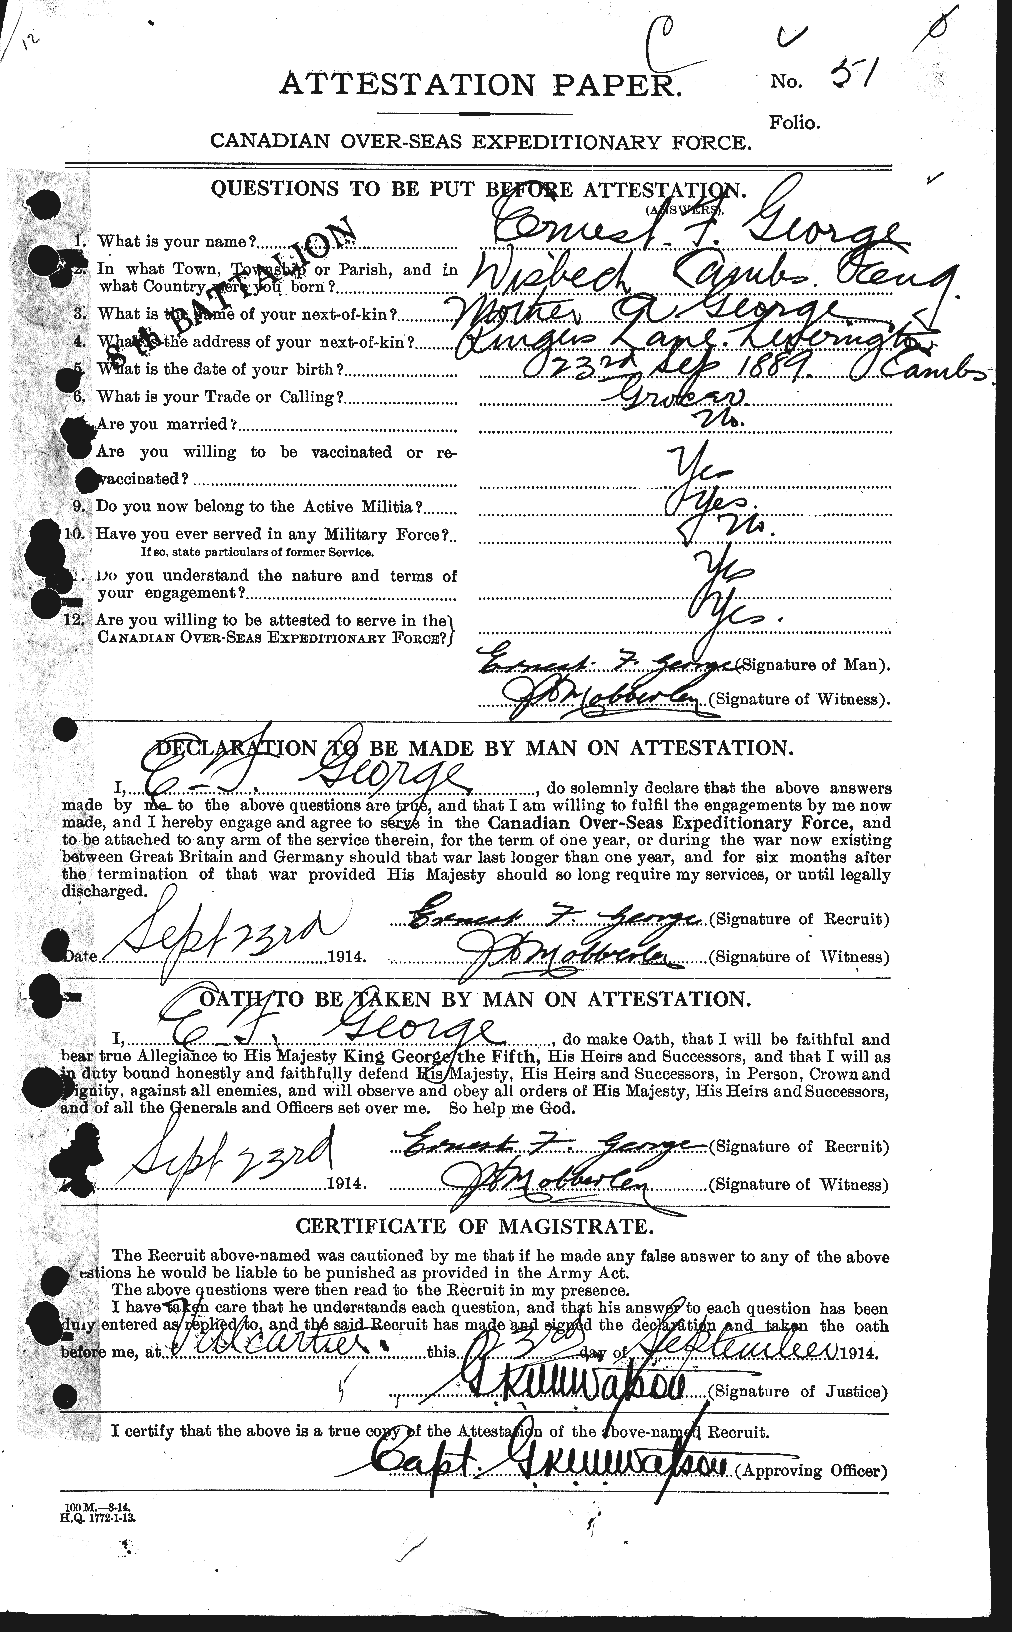 Personnel Records of the First World War - CEF 344676a